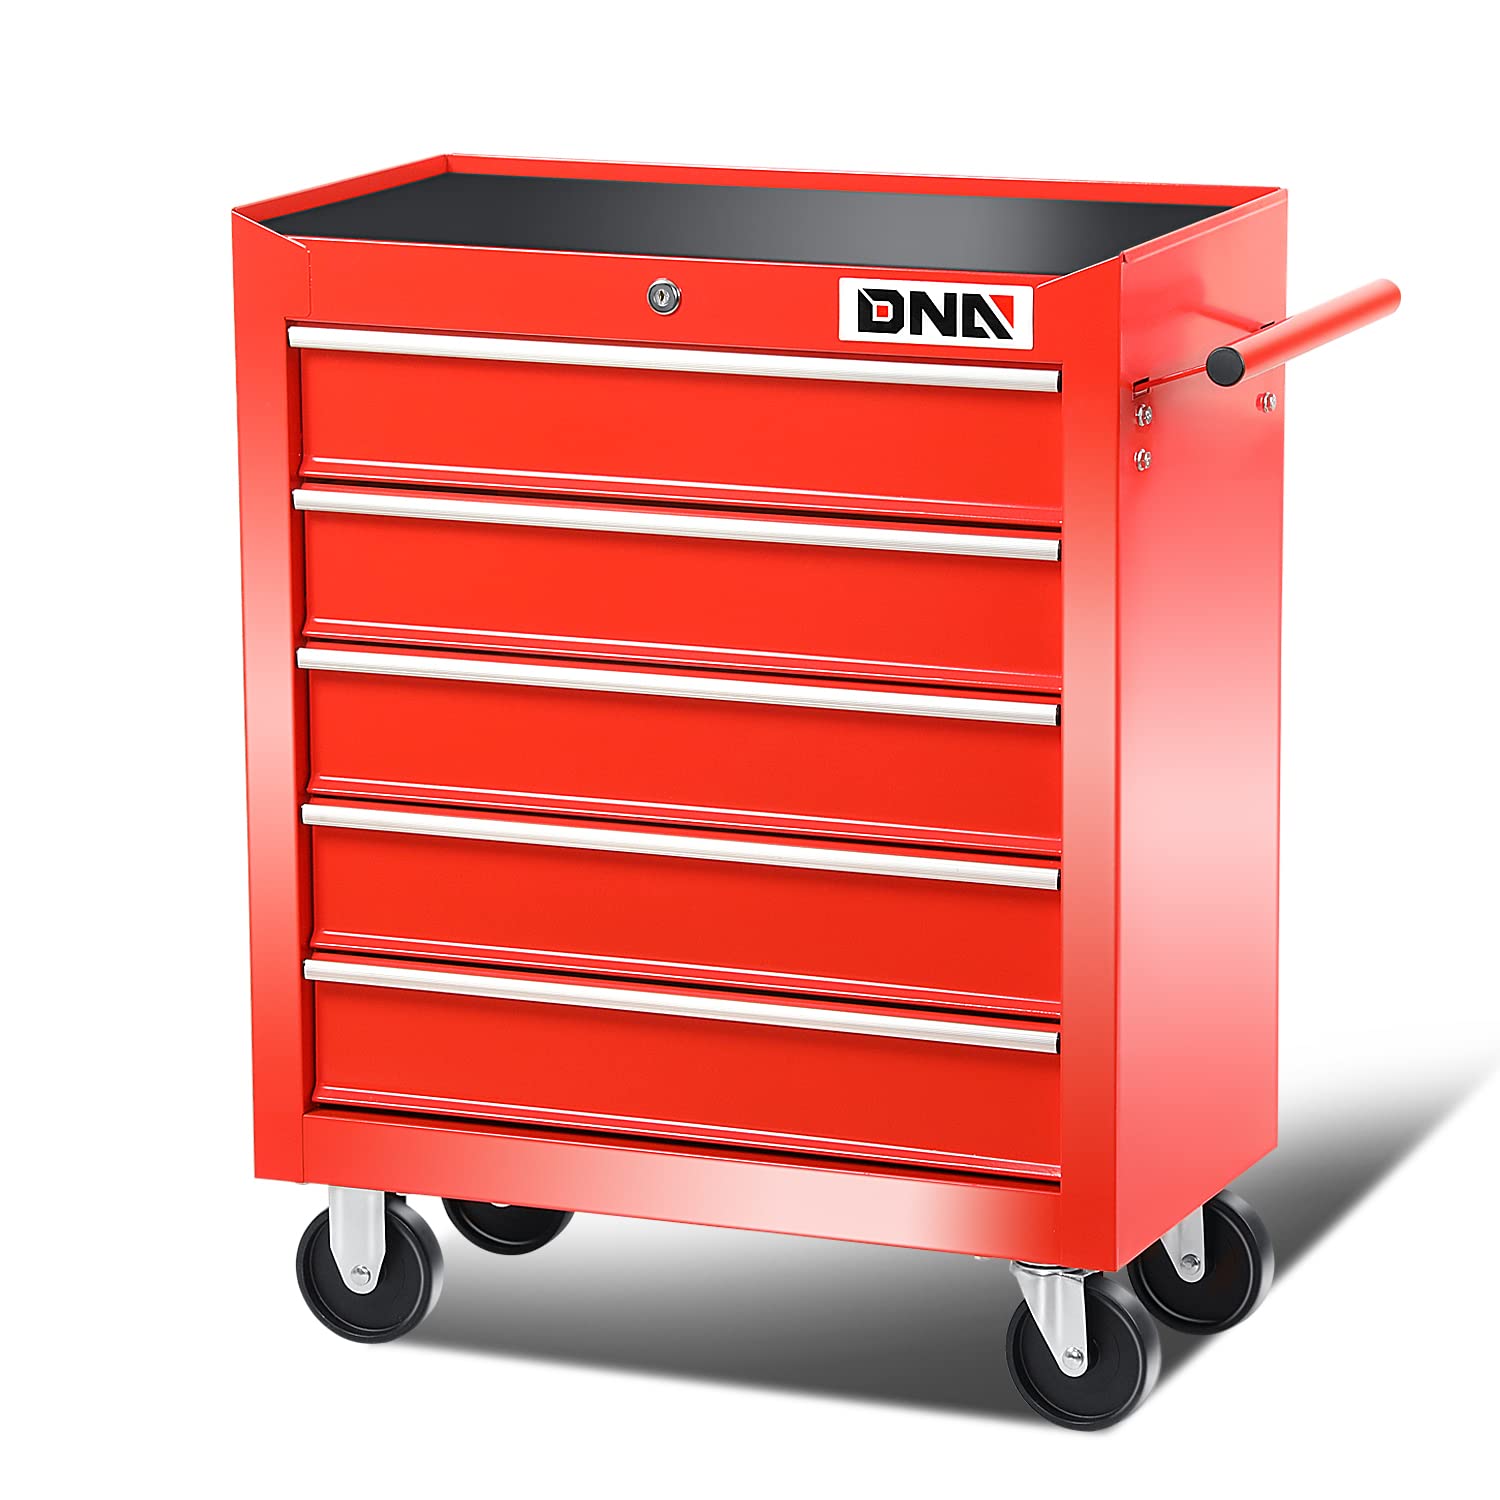 DNA MOTORING TOOLS-00263 5-Drawer Plastic Top Rolling Tool Cabinet with Keyed Locking System,13" D x 24.5" W x 30.5" H,Red